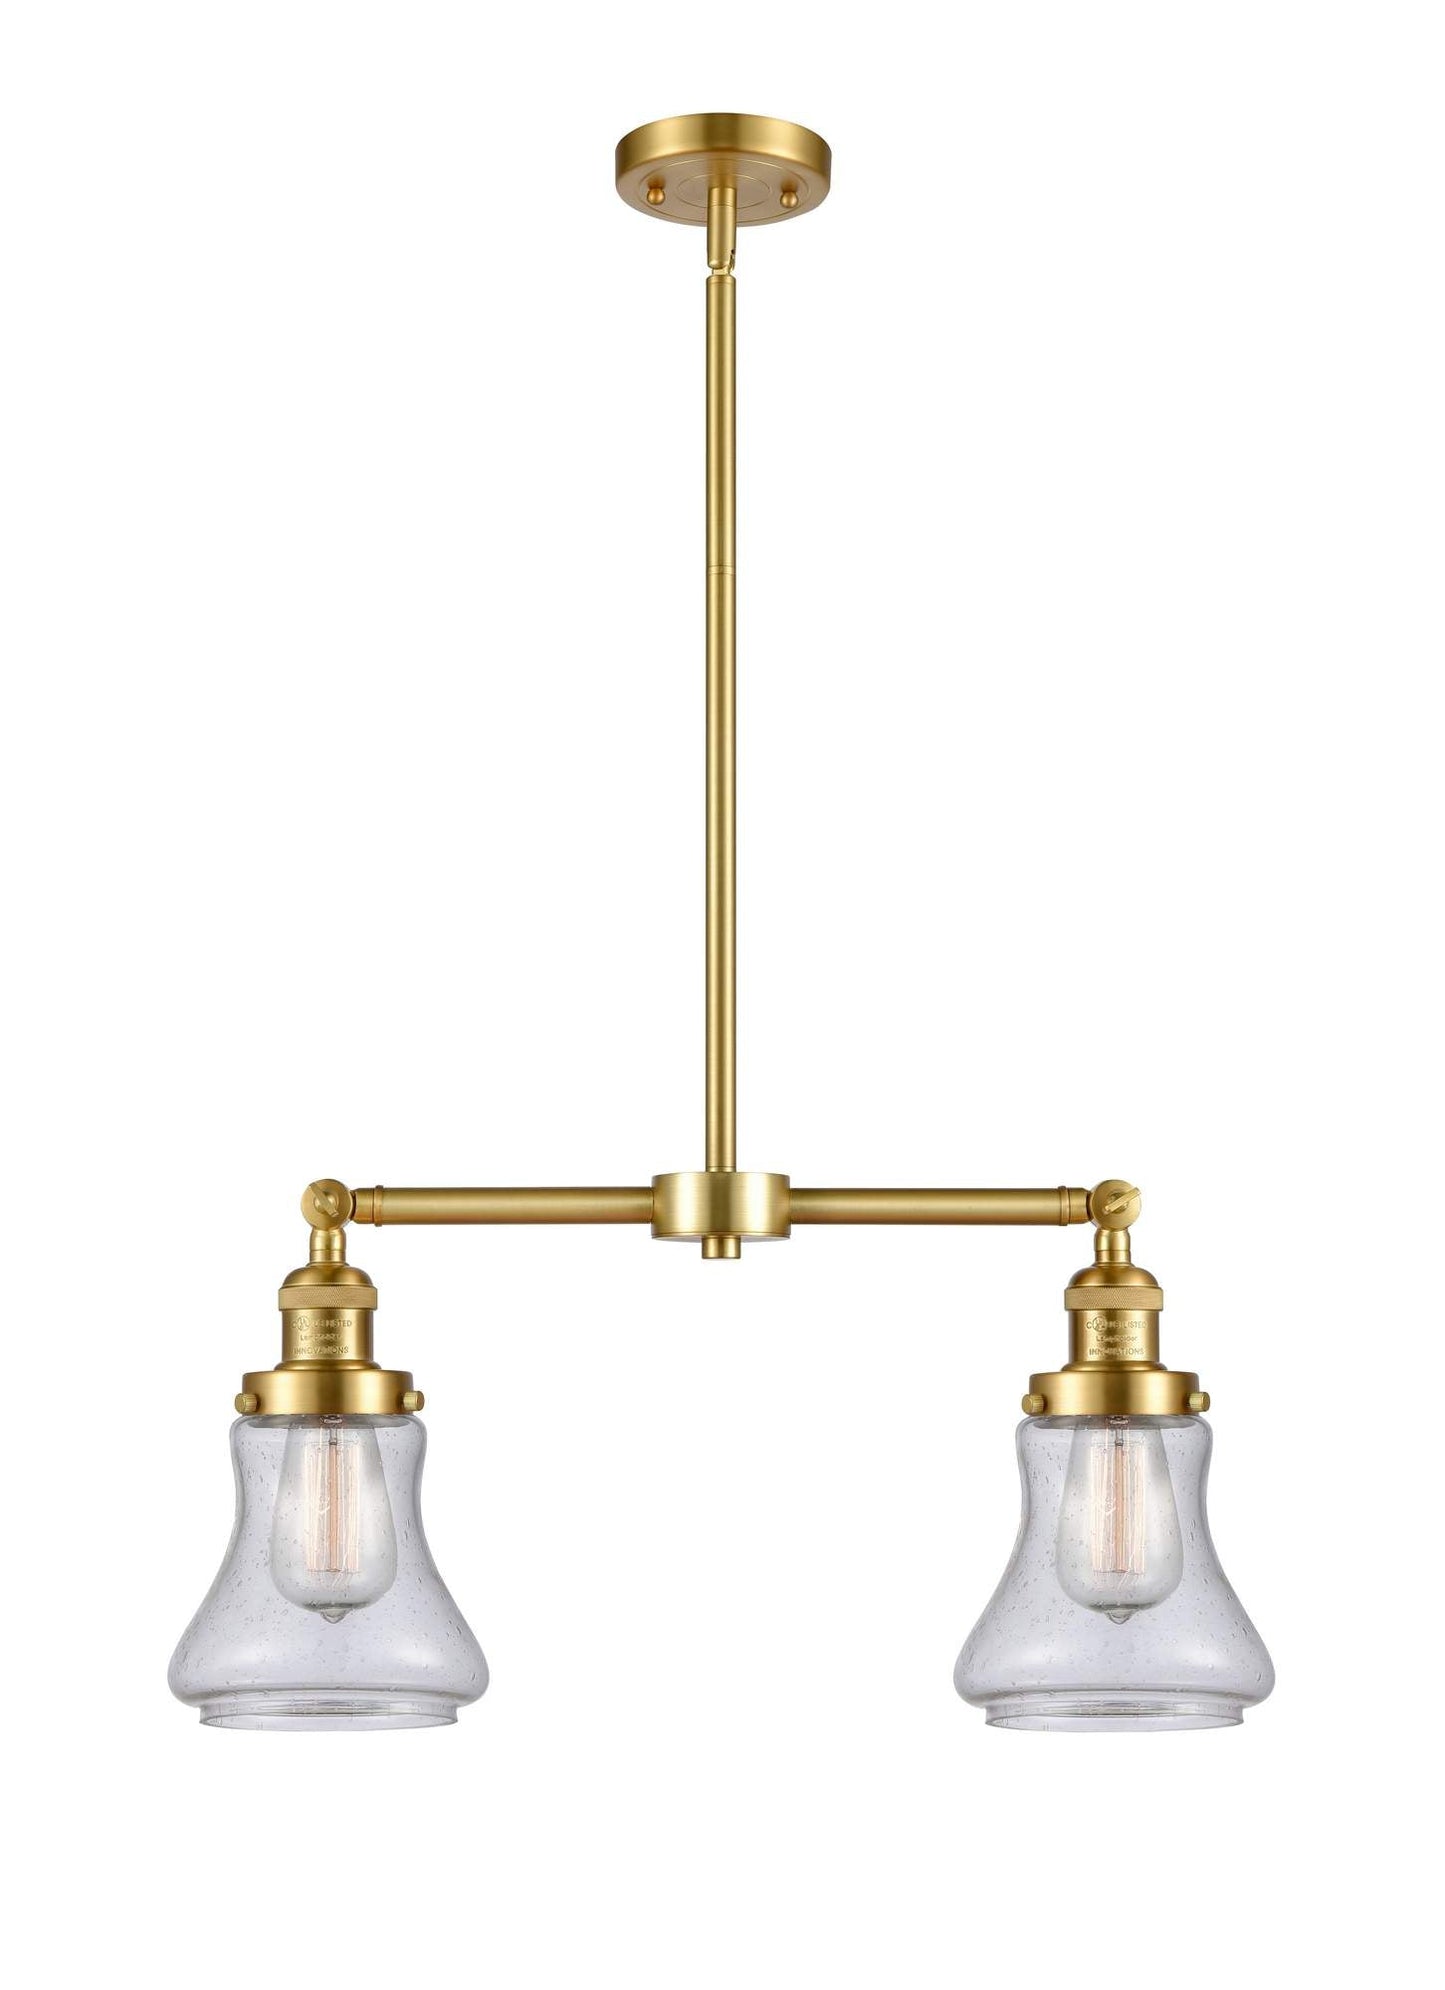 209-SG-G194 2-Light 21" Satin Gold Island Light - Seedy Bellmont Glass - LED Bulb - Dimmensions: 21 x 5 x 10<br>Minimum Height : 21.375<br>Maximum Height : 45.375 - Sloped Ceiling Compatible: Yes